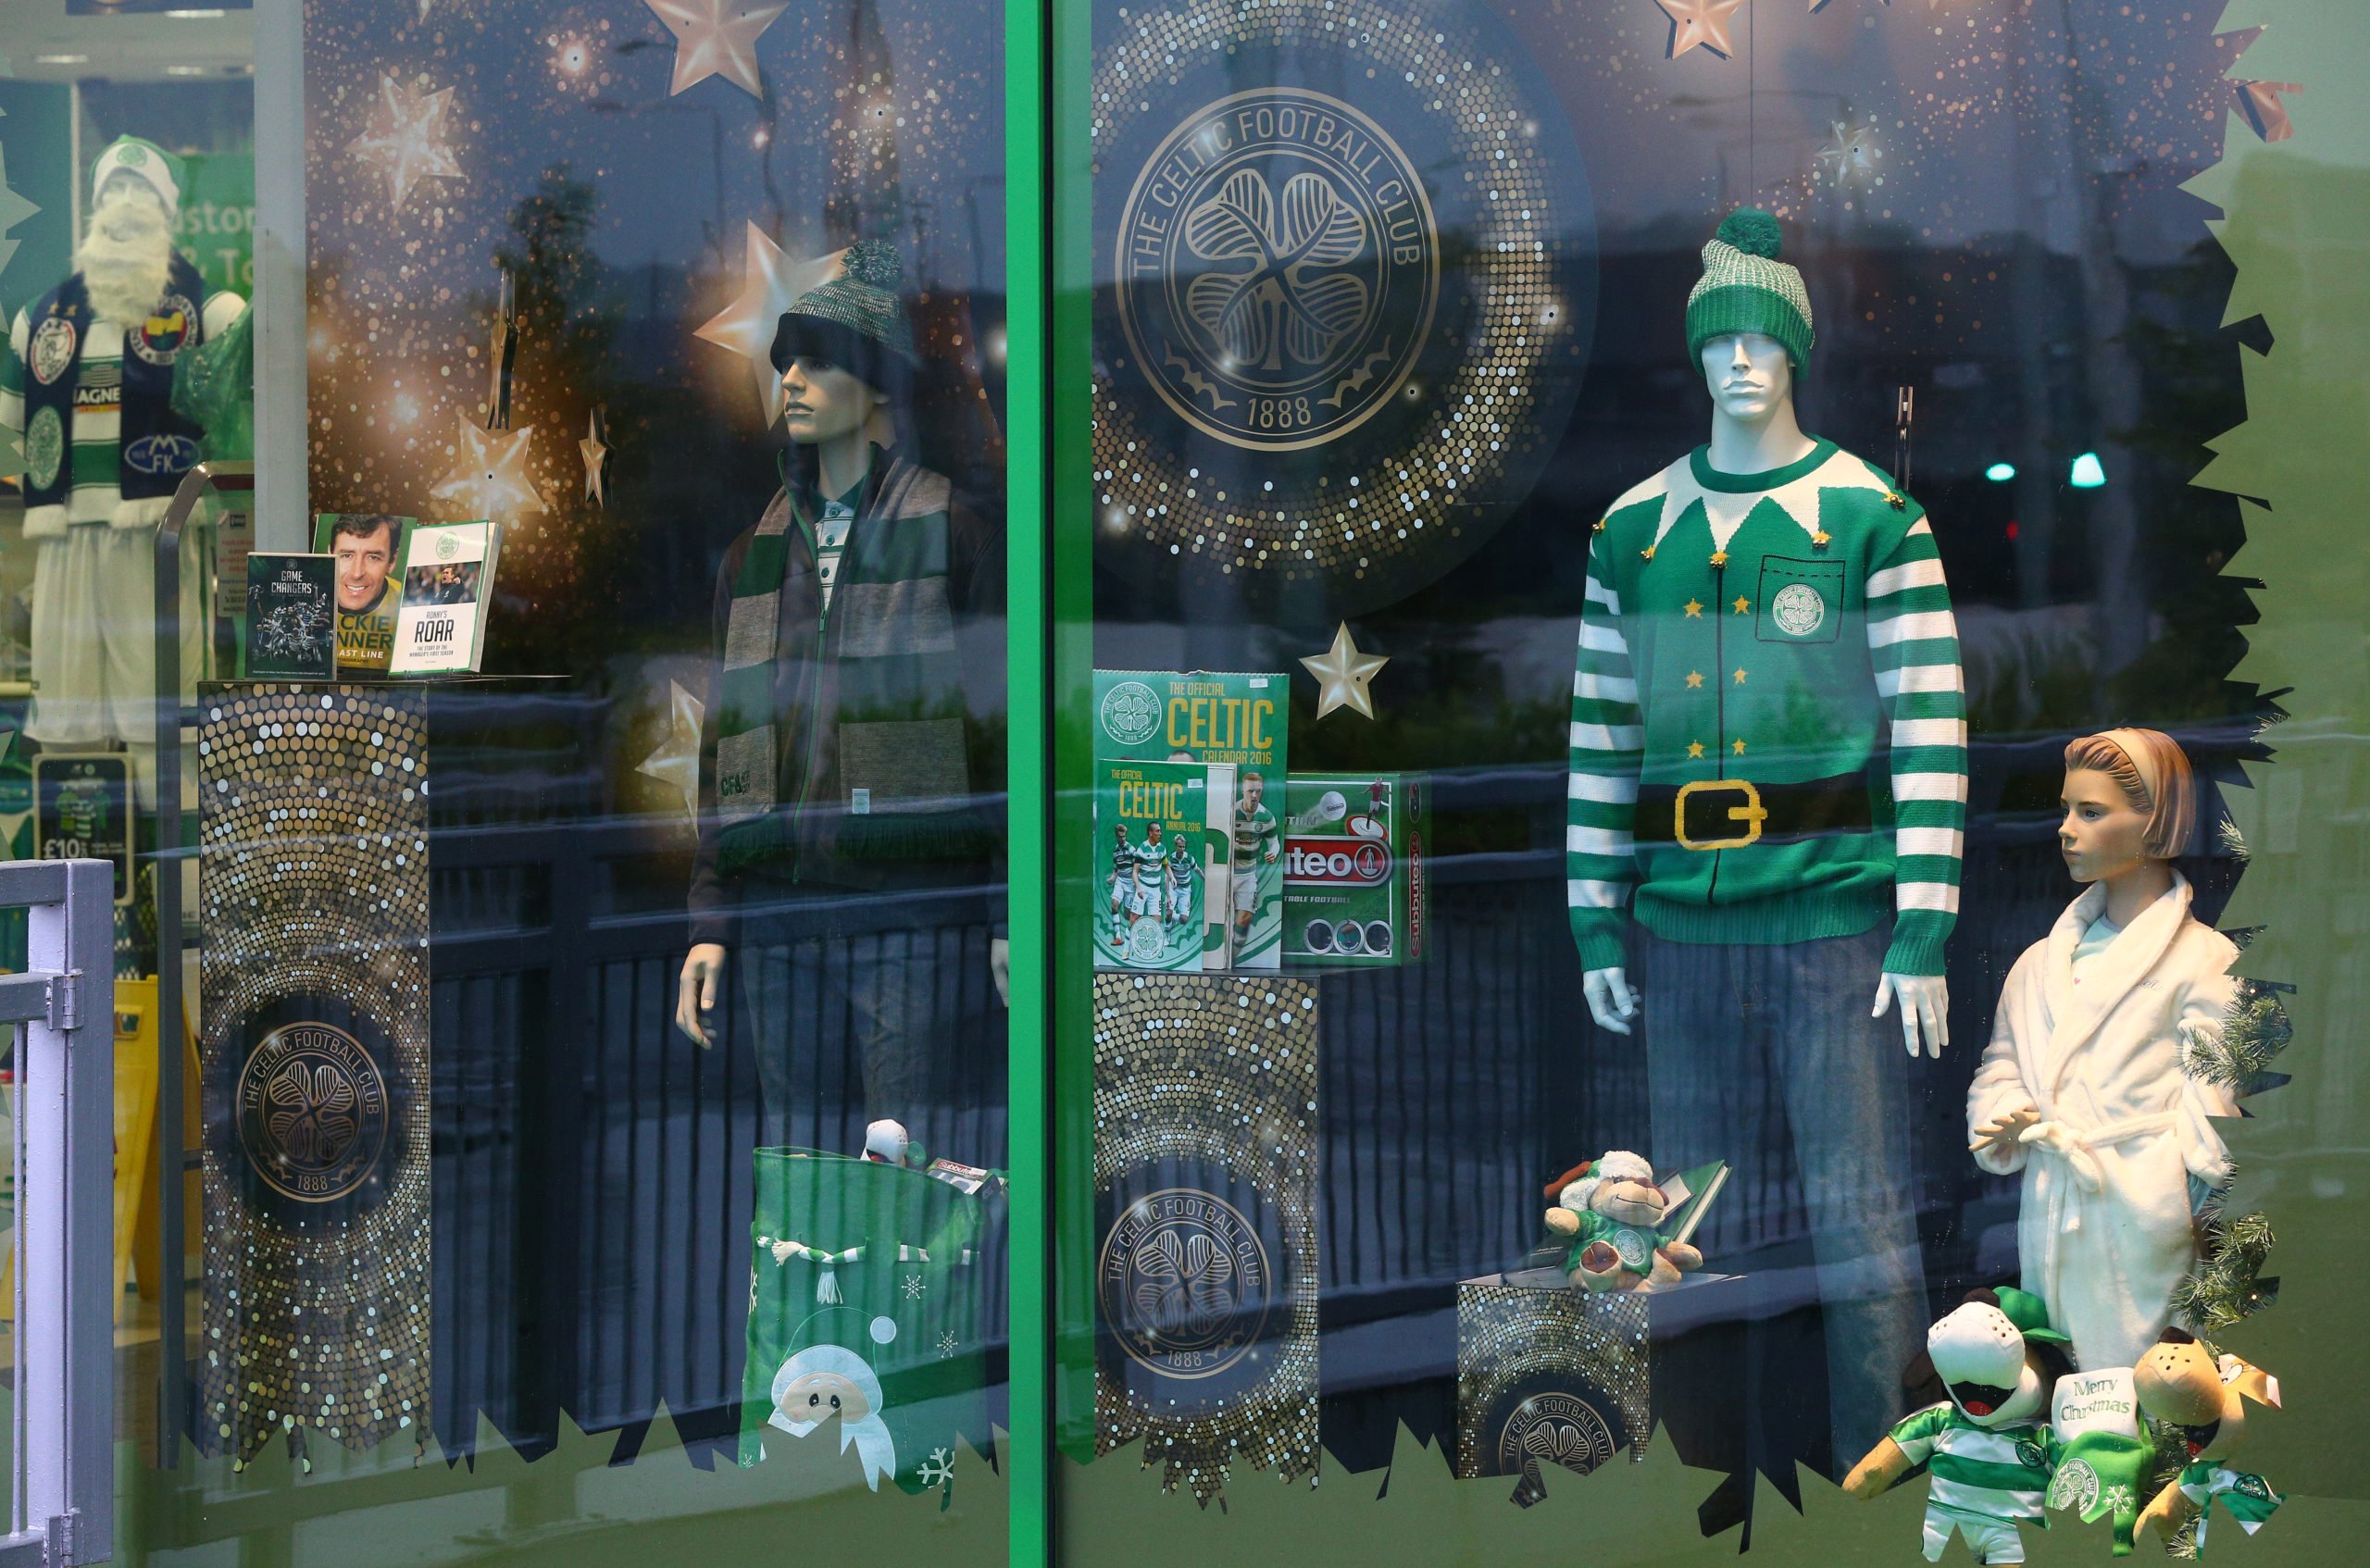 Celtic forced to close city centre shop this weekend